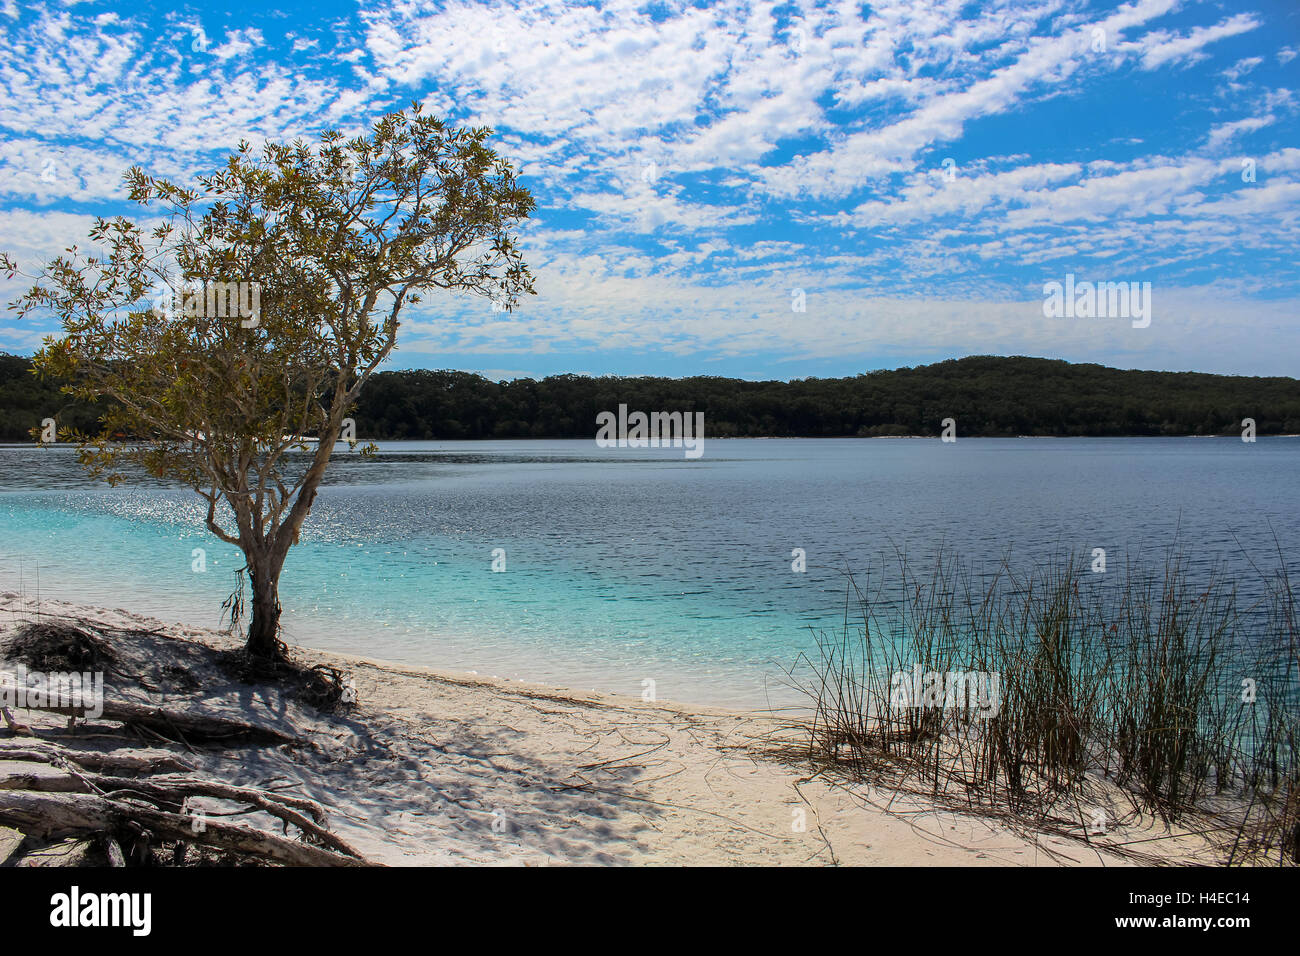 Looking Out across the fresh water of Lake McKenzie on the worlds largest sand island, Fraser island in Queensland Australia. Stock Photo